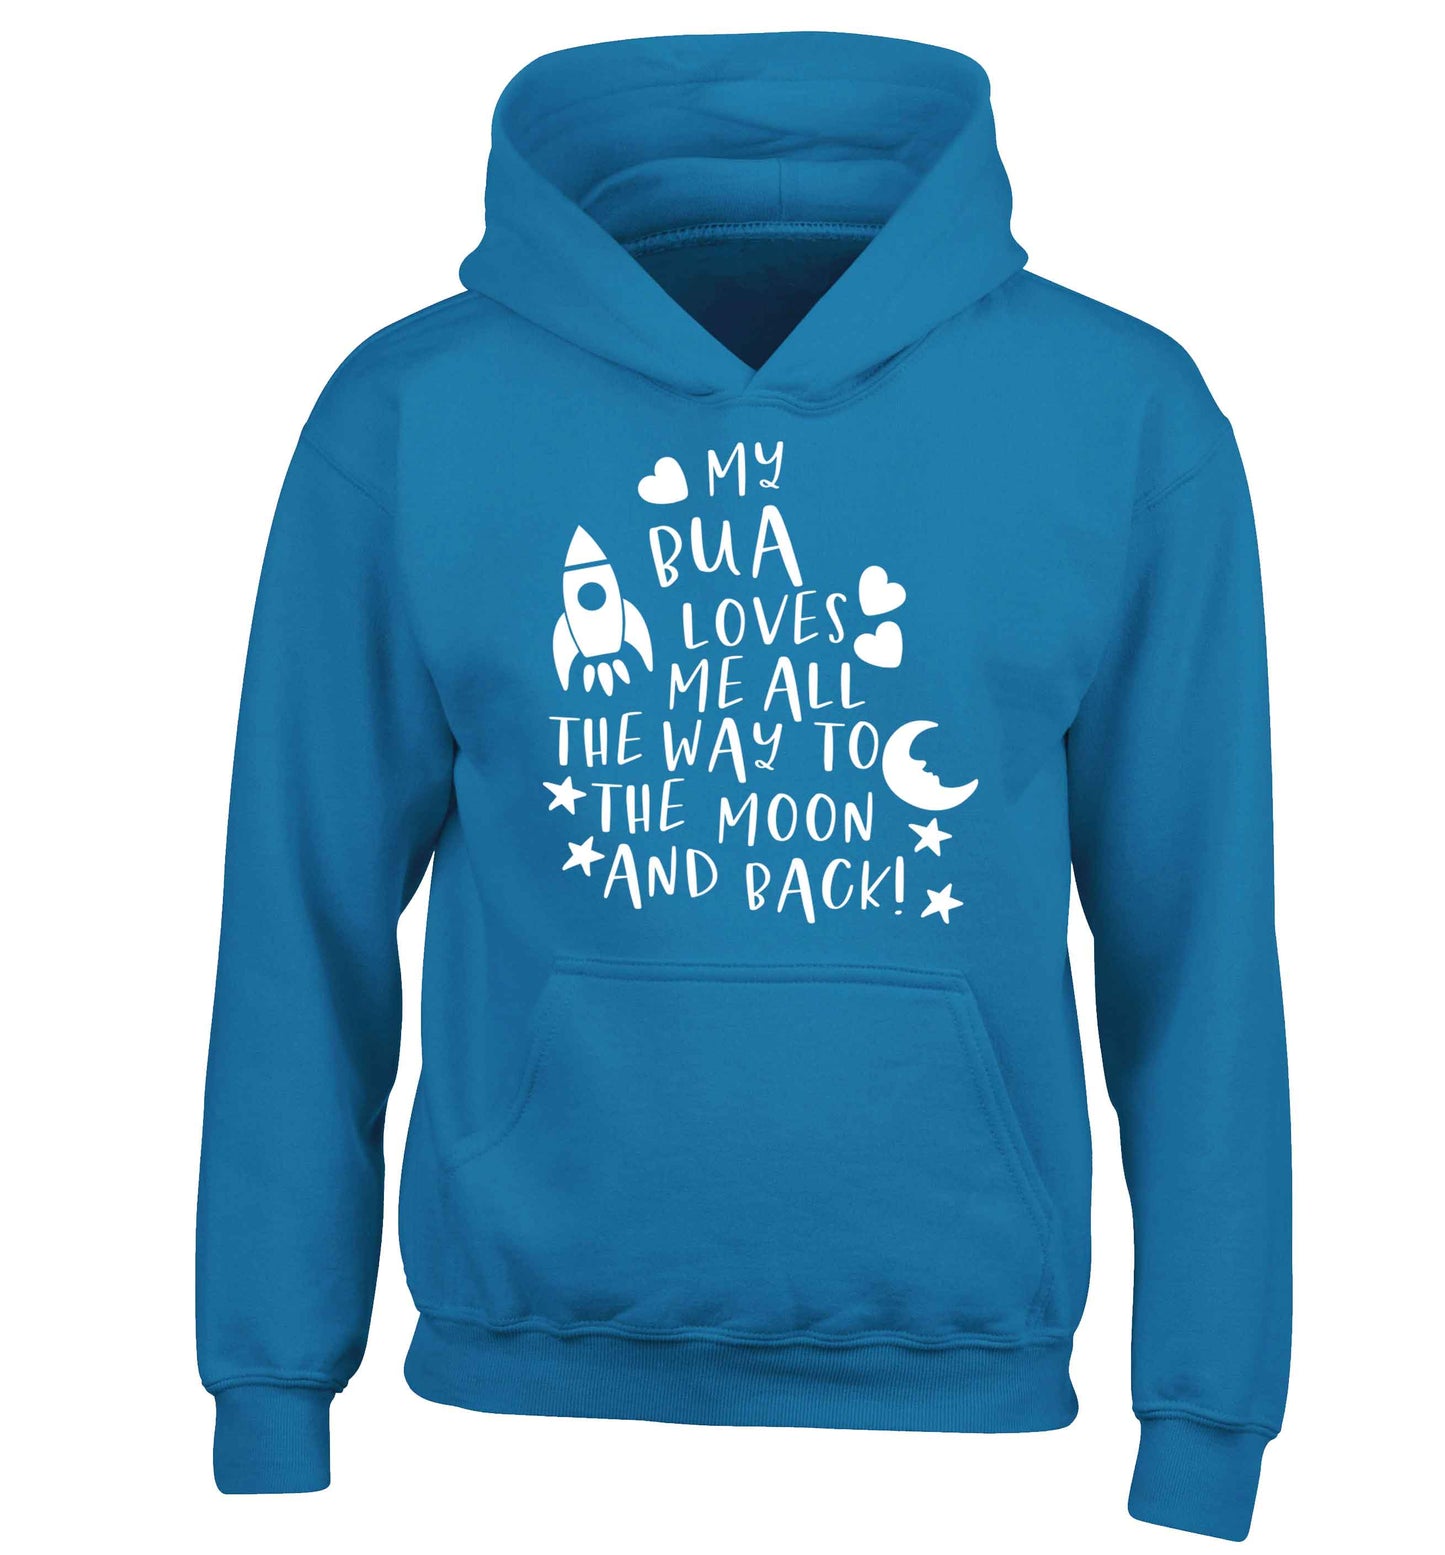 My bua loves me all they way to the moon and back children's blue hoodie 12-13 Years